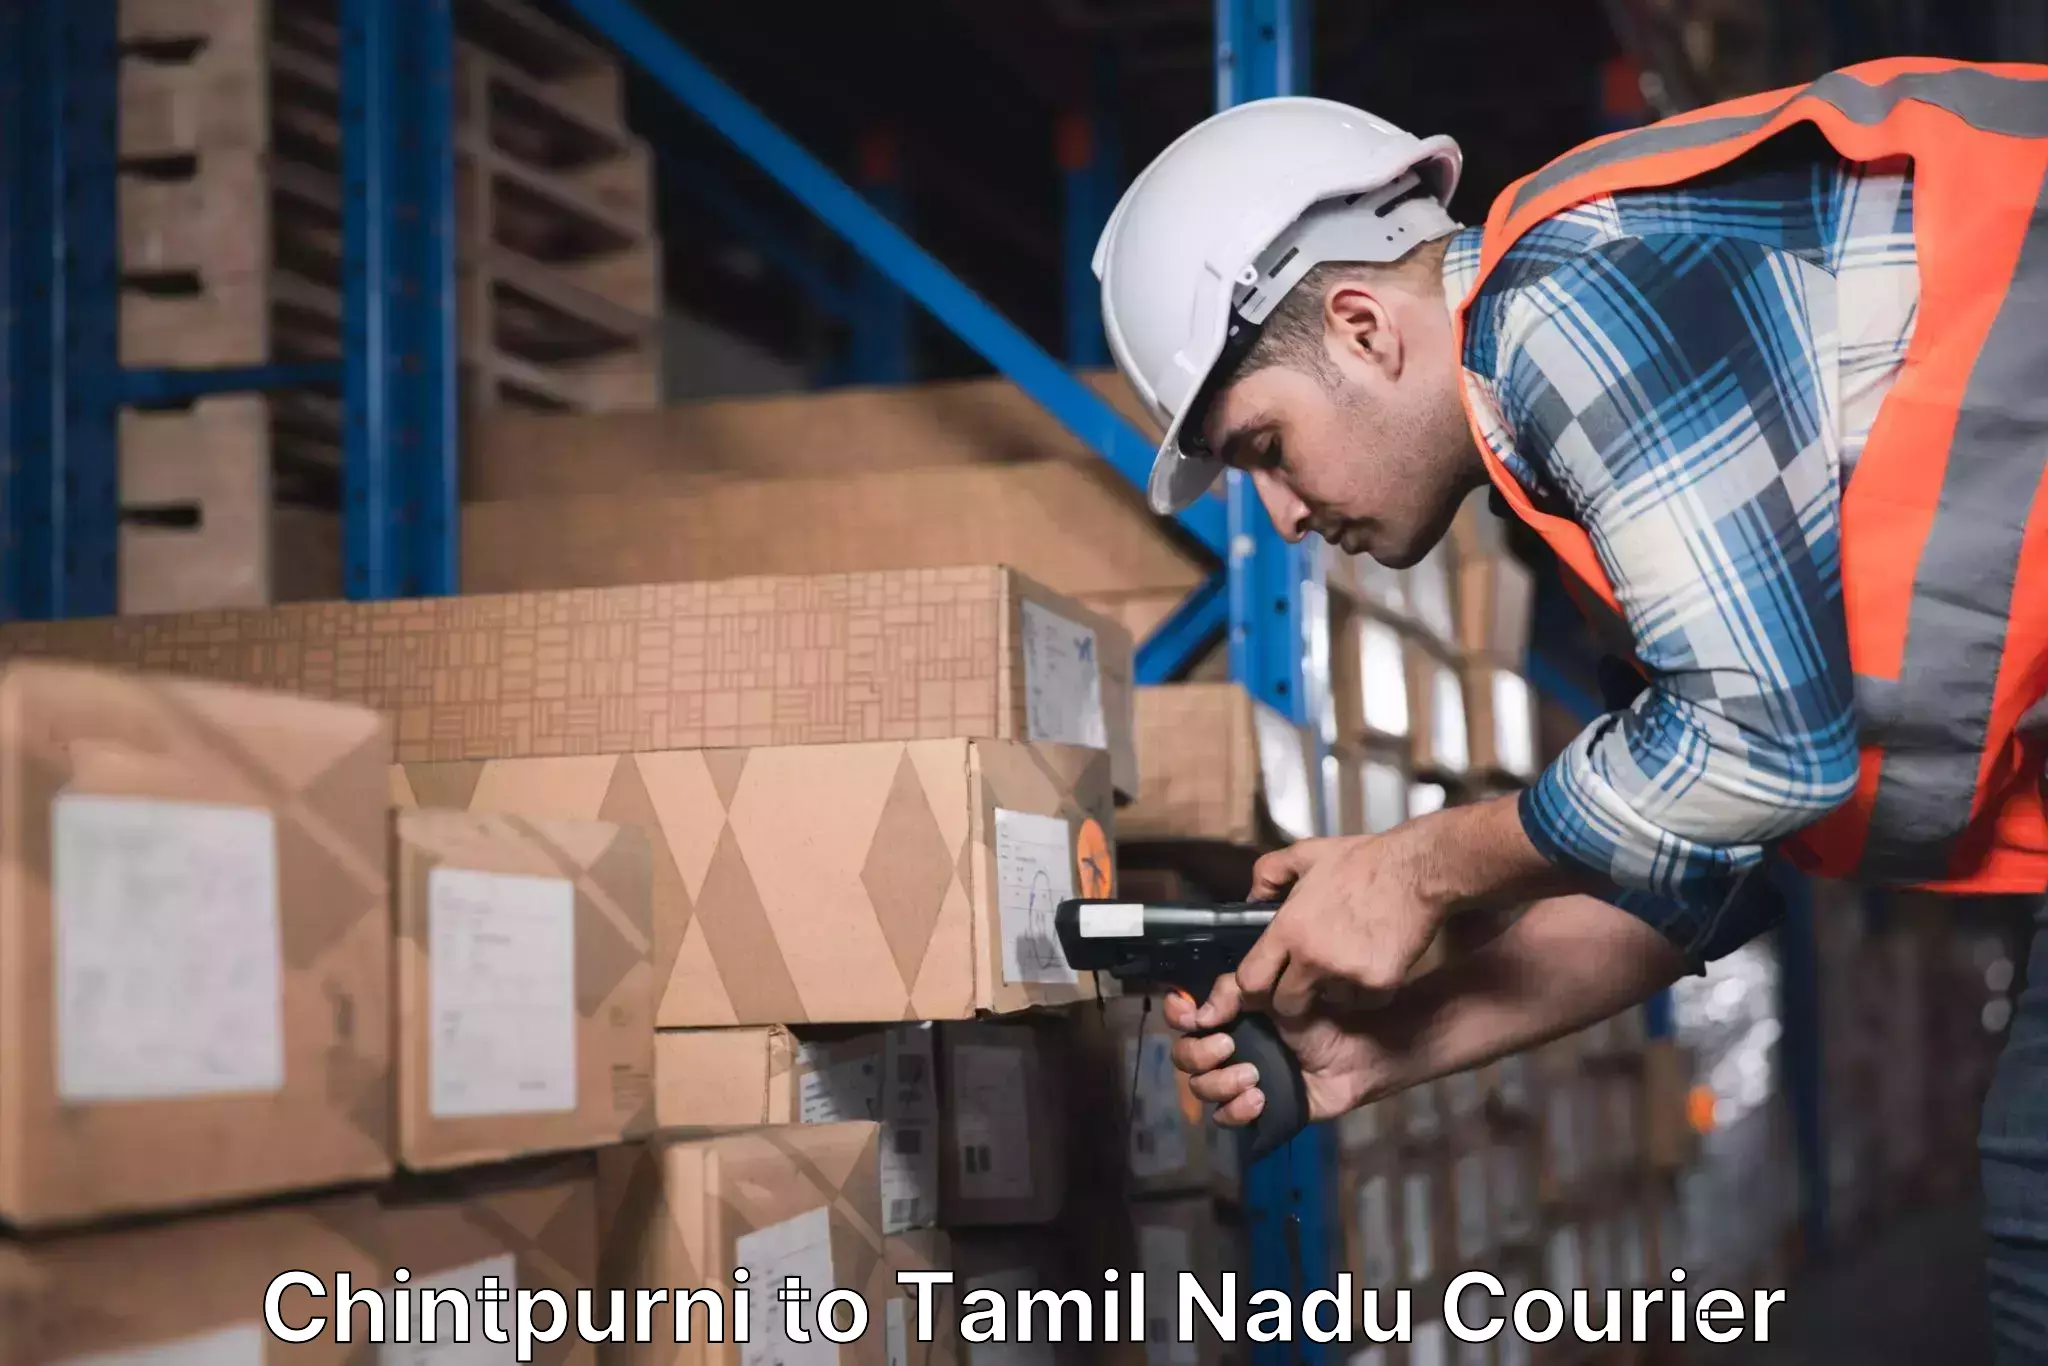 Subscription-based courier Chintpurni to Cuddalore